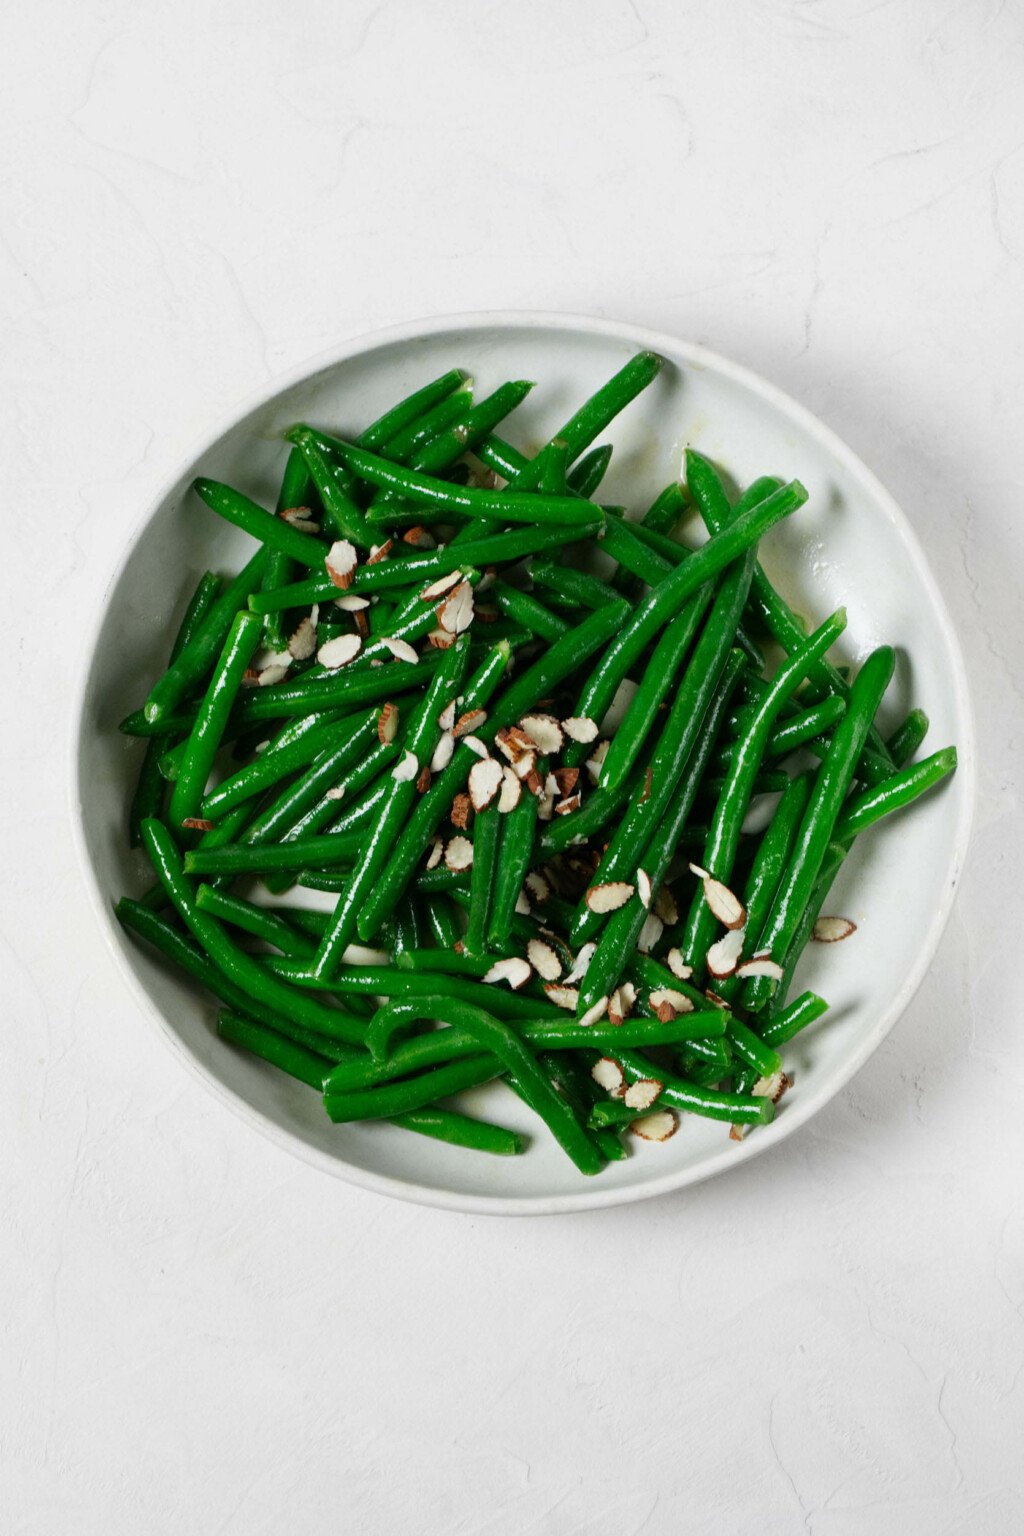 An overhead image of a bowl of steamed green beans, which are topped with a small row of sliced almonds.